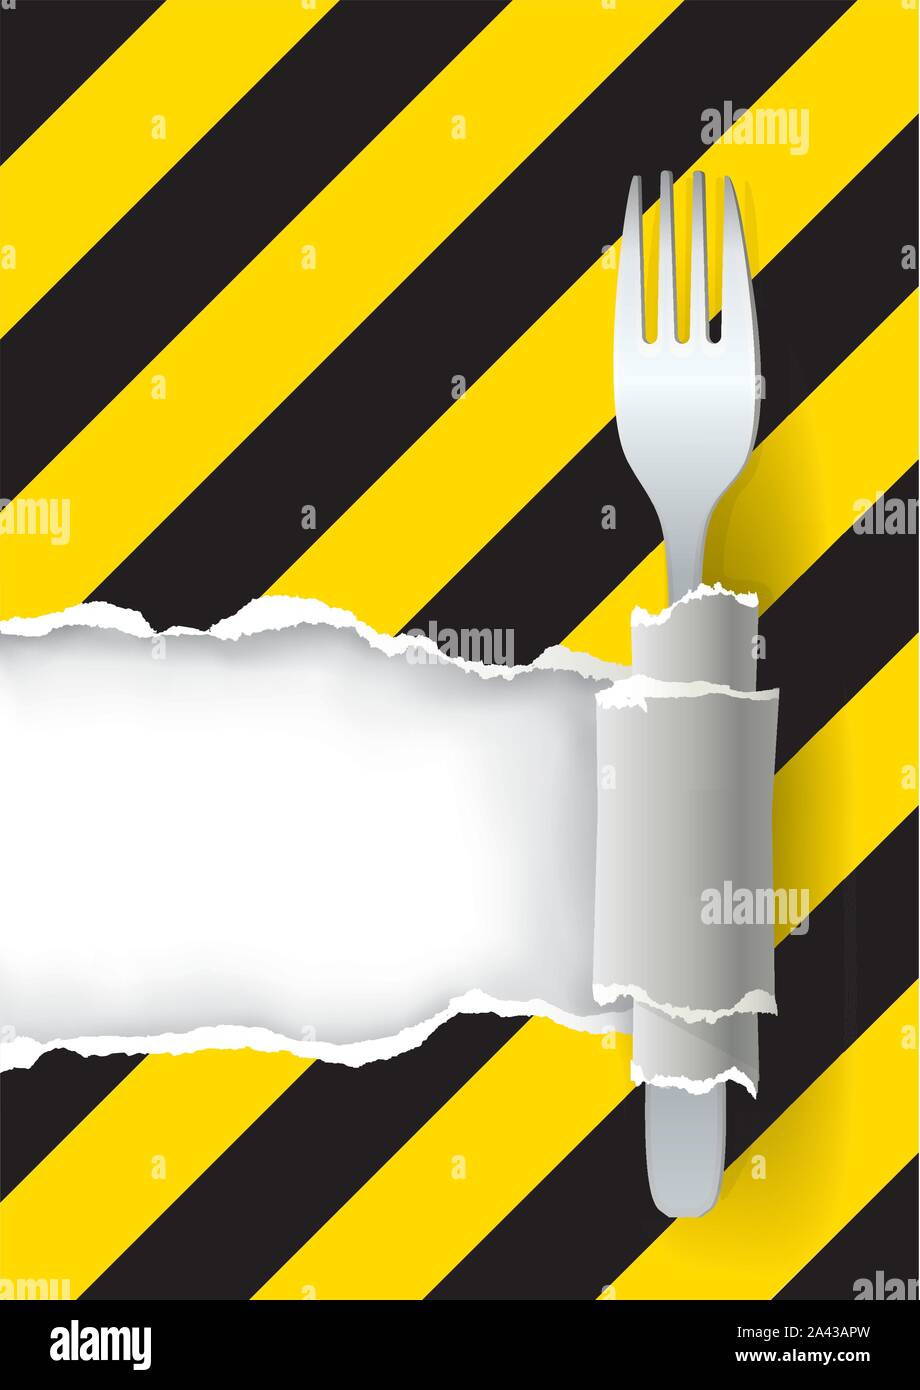 Dangerous unhealthy food, menu background with fork. Place for your text or image. Vector available. Stock Vector